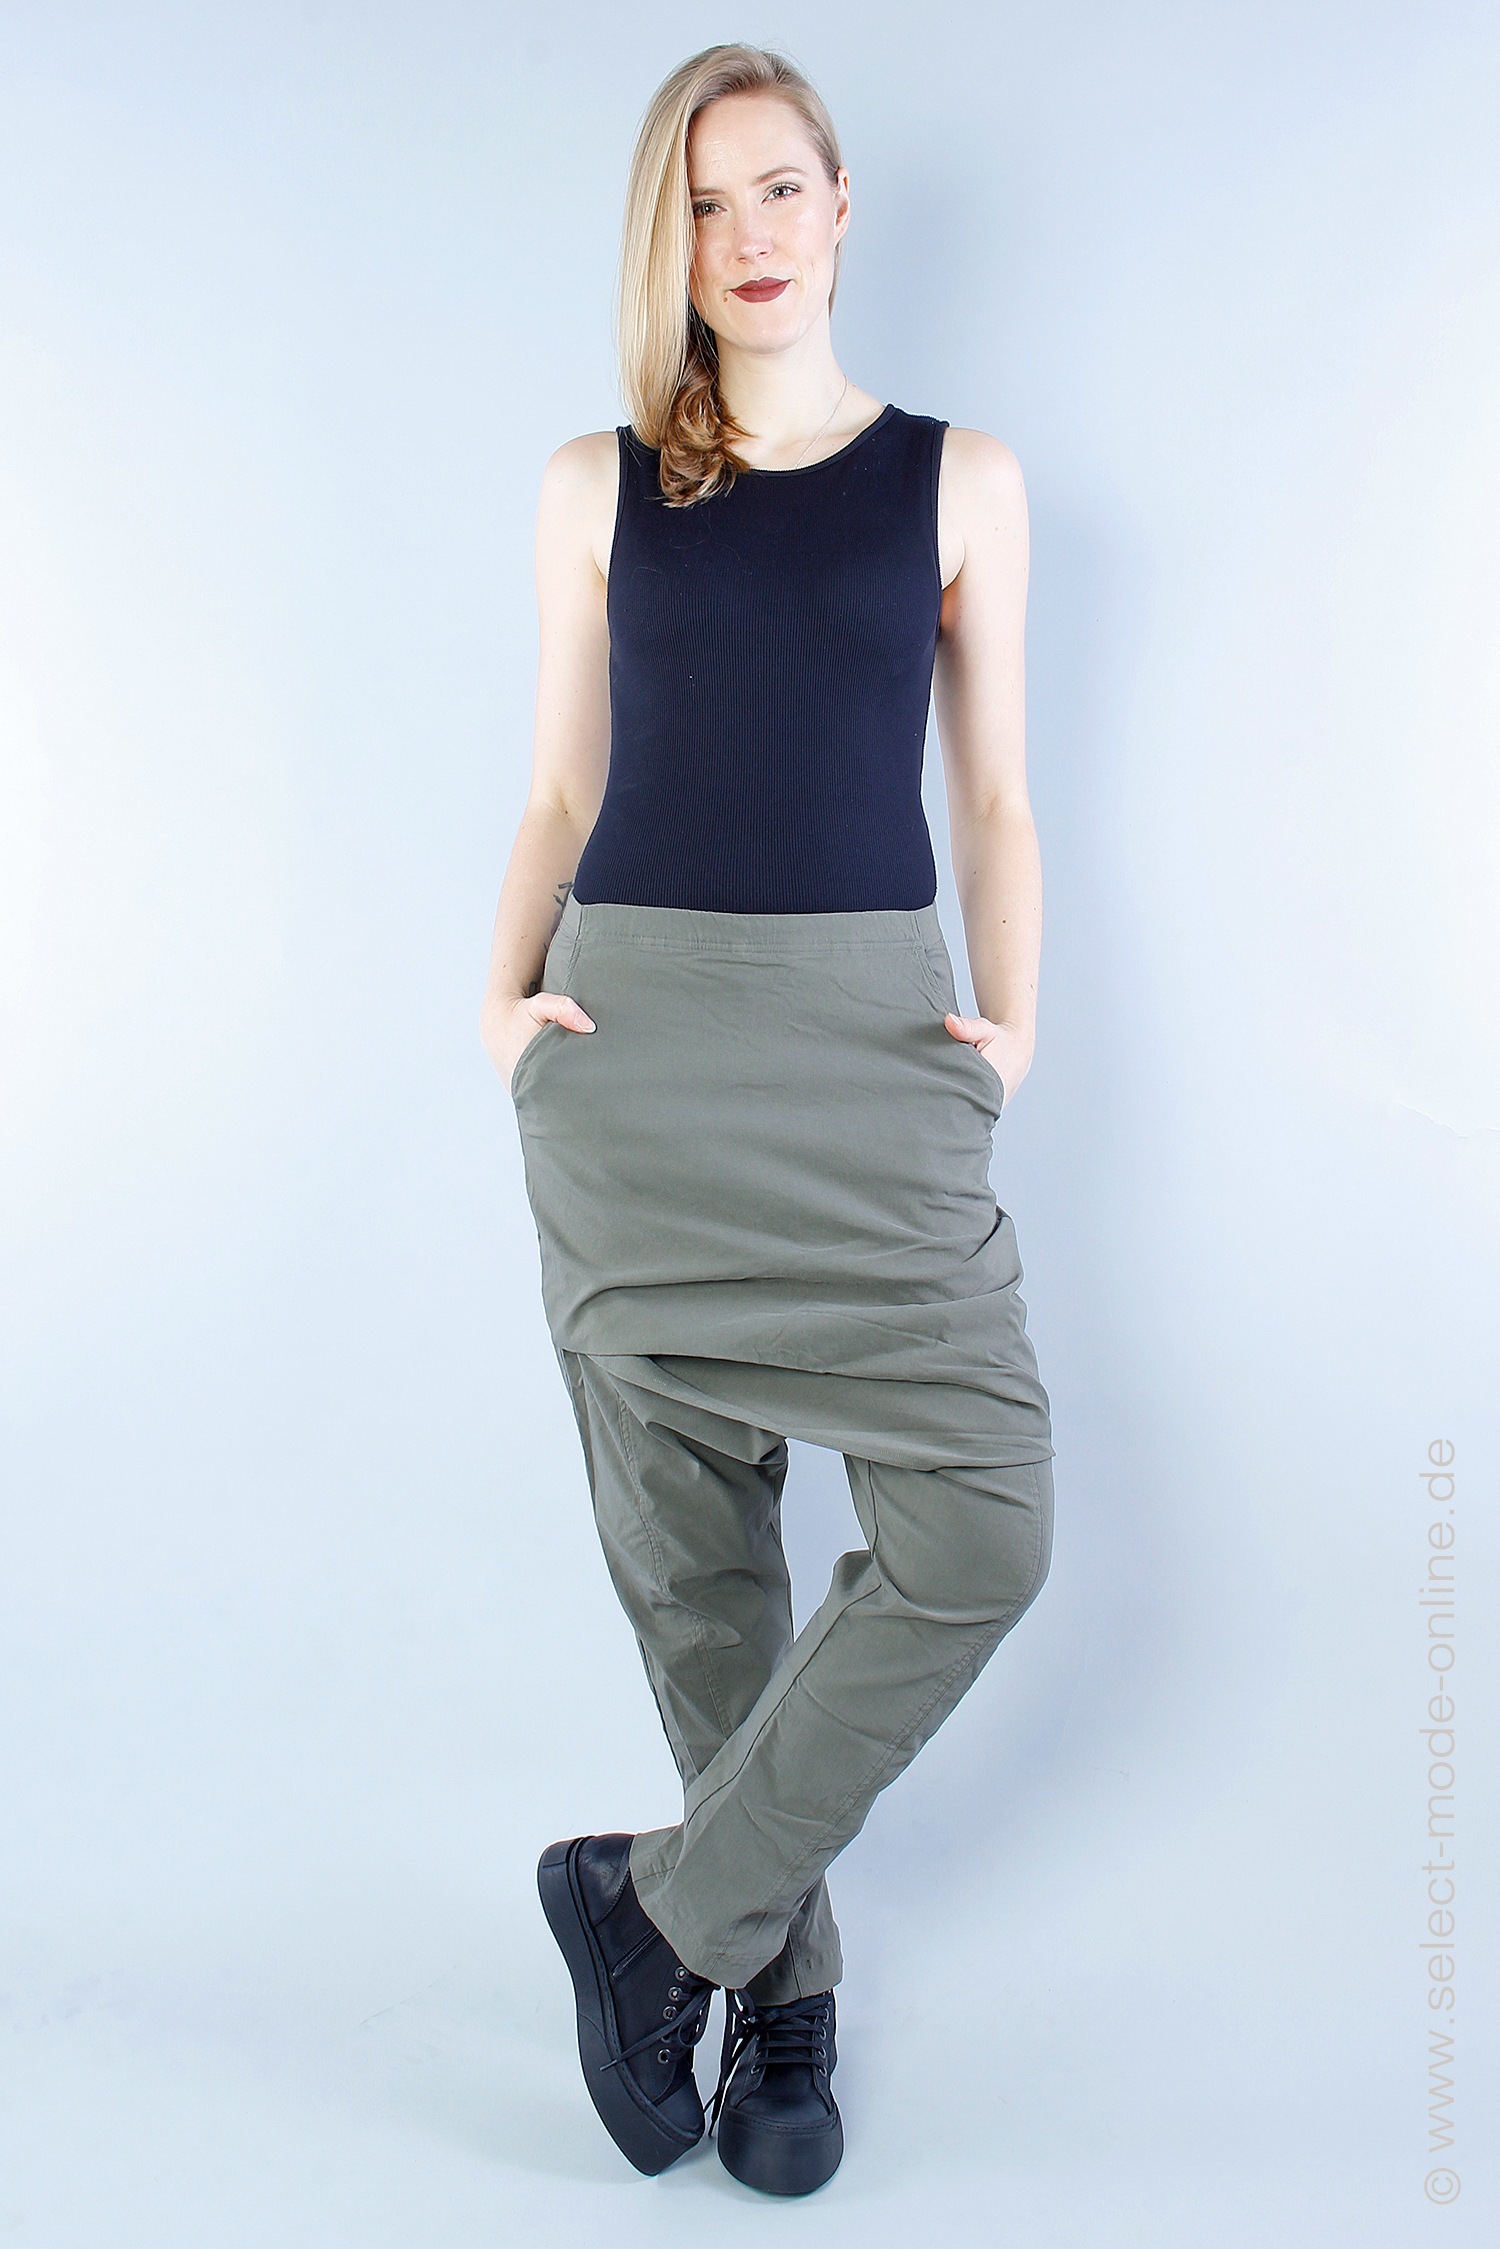 Fancy Hippie Drop Crotch Pants| Online Store For Pants From Nepal